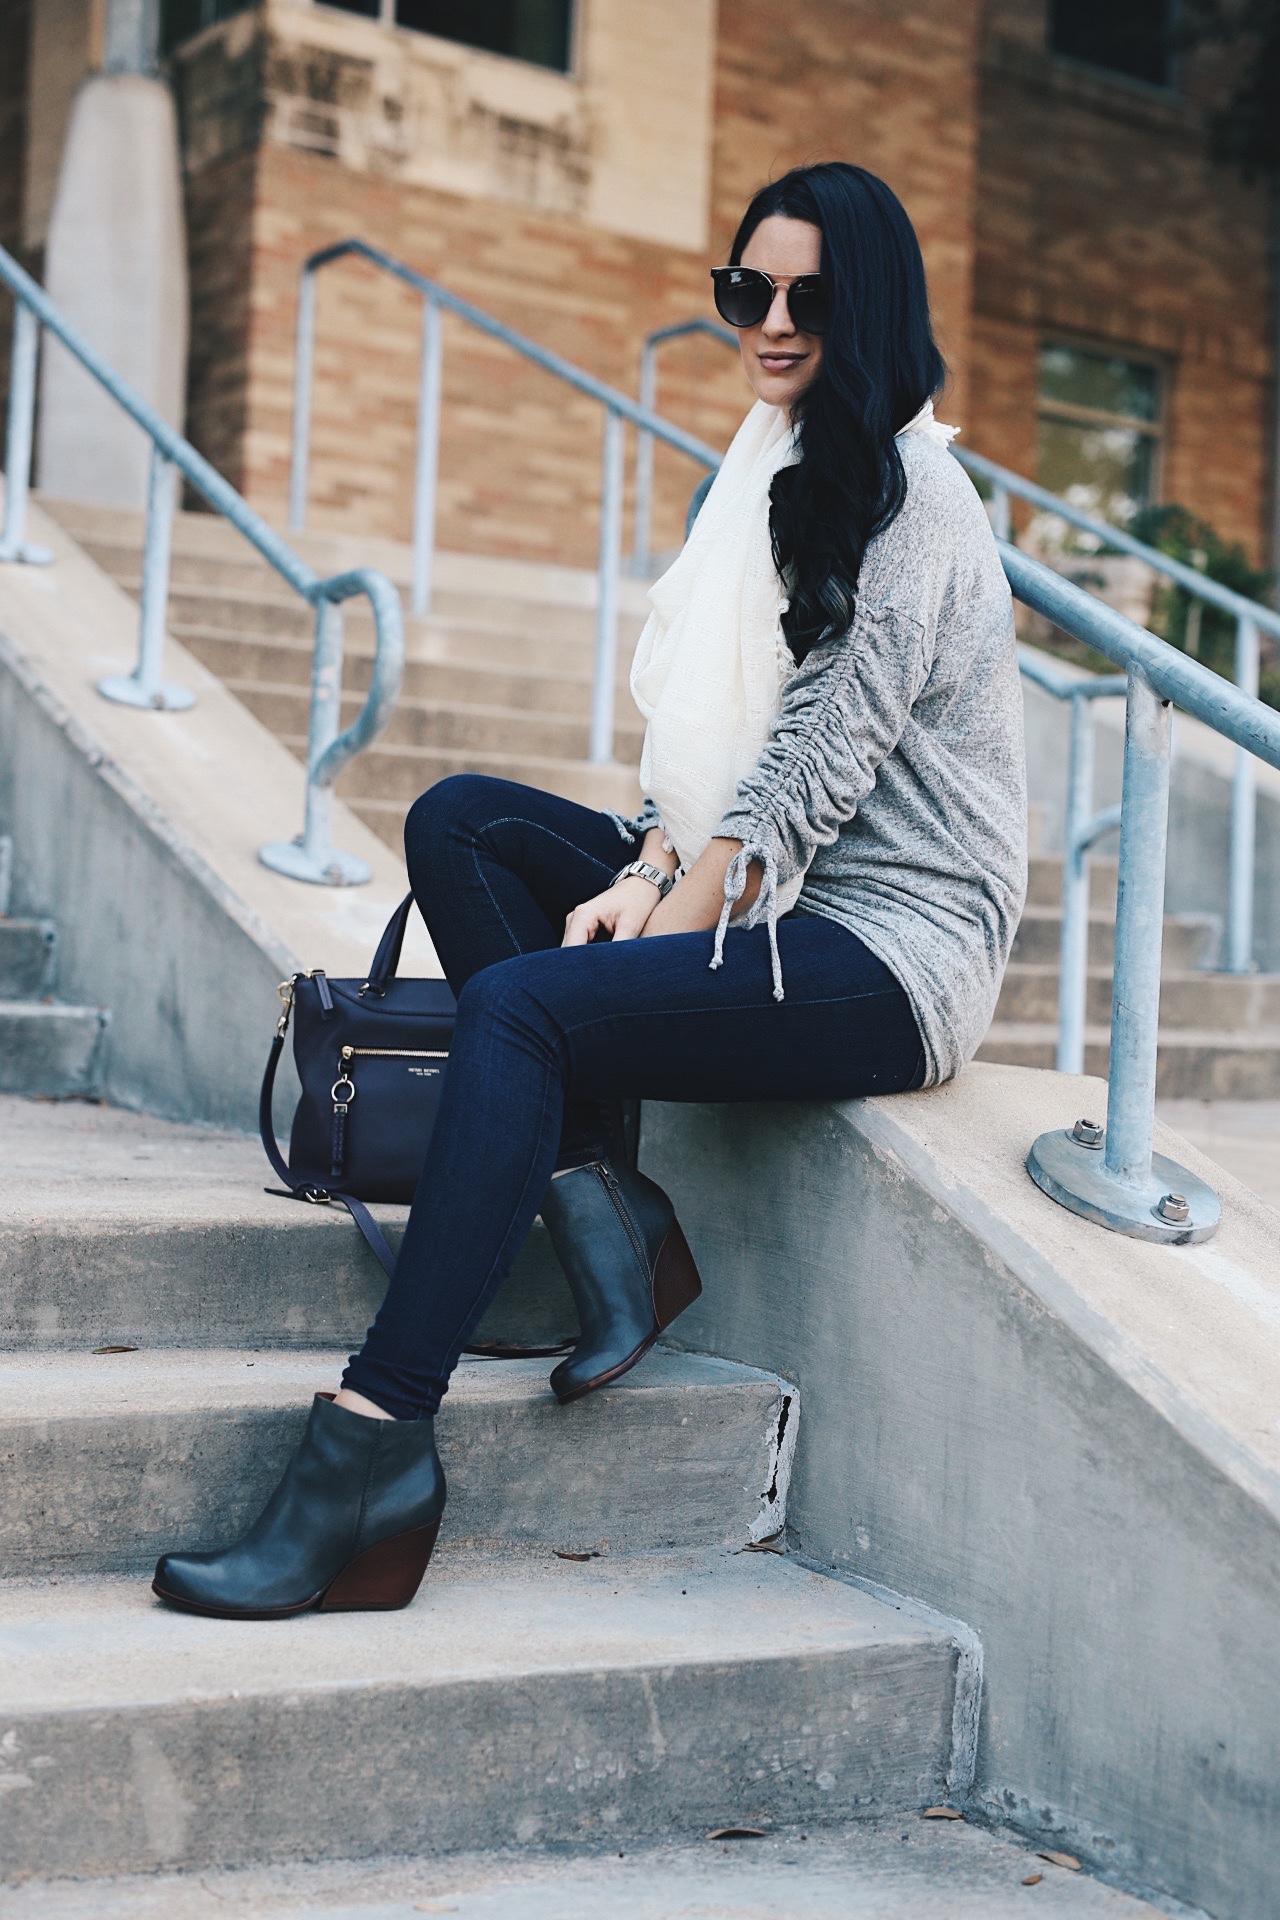 DTKAustin shares why she loves leather shoe brand Kork-Ease and why you should be online shopping at Zappos. | fall fashion tips | fall outfit ideas | fall style tips | what to wear for fall | cool weather fashion | fashion for fall | style tips for fall | outfit ideas for fall || Dressed to Kill